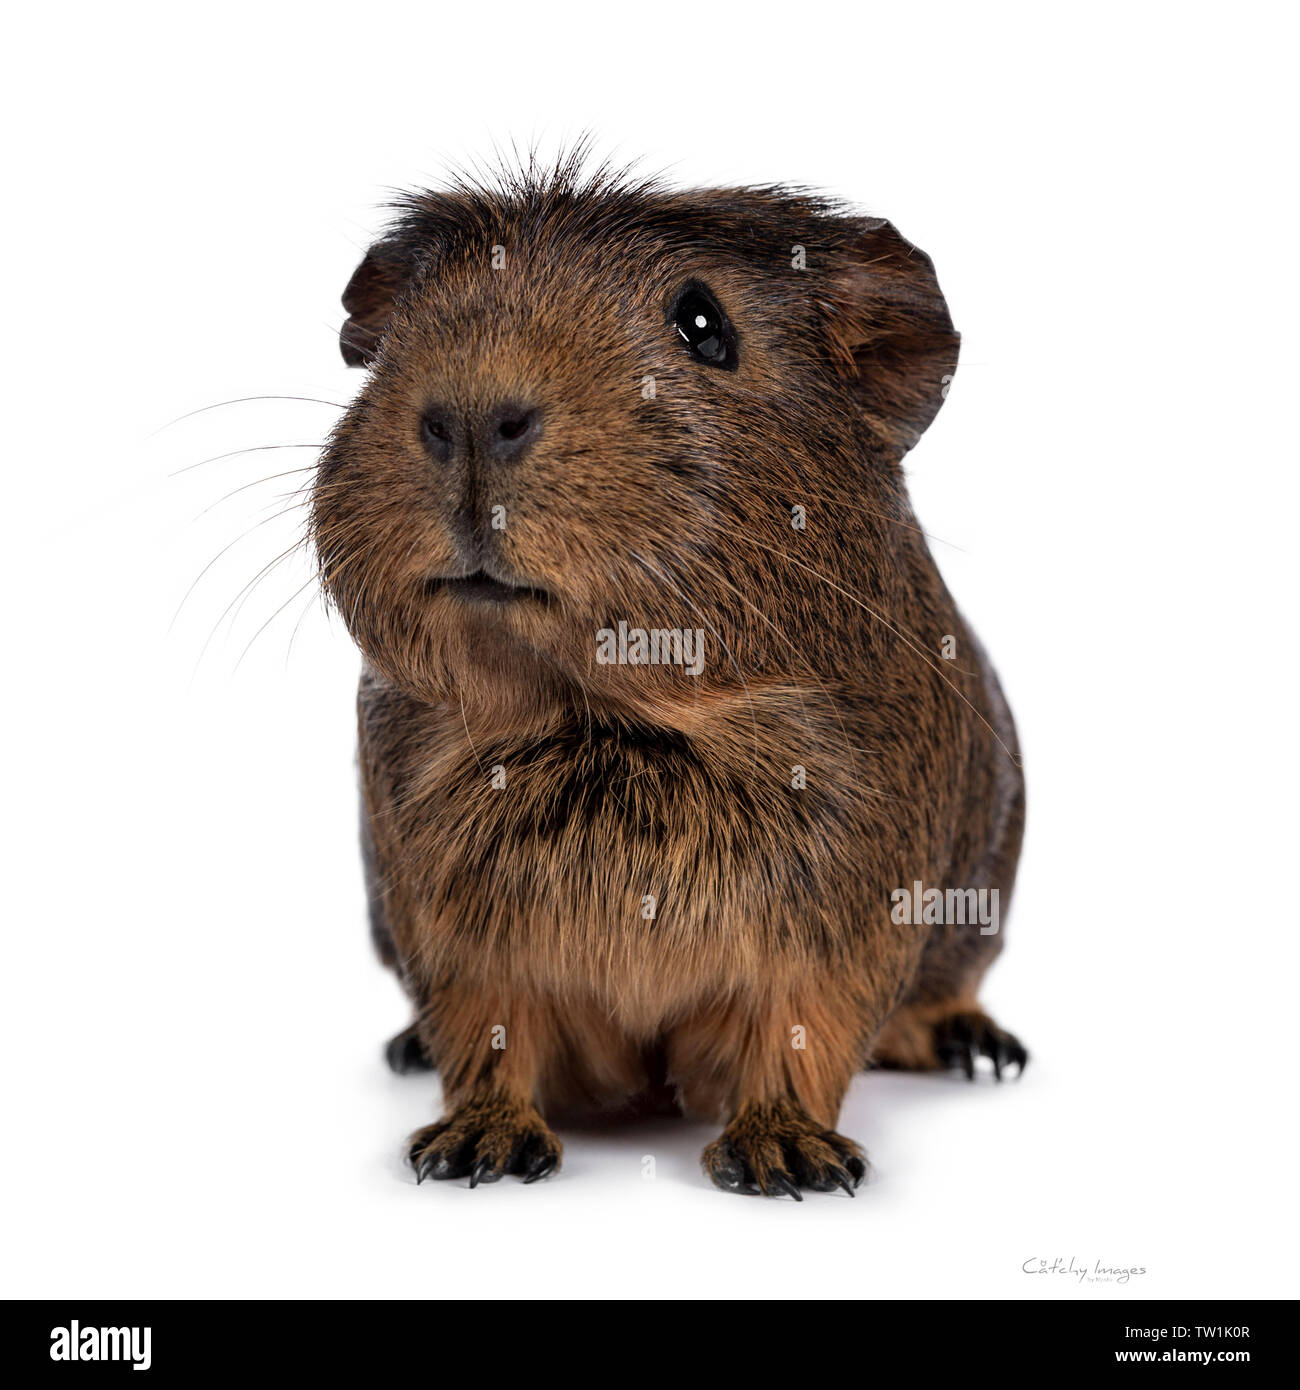 Cute crested cavy, standing facing front. Looking towards camera with tilted head. Isolated on white background. Mouth silly open. Stock Photo